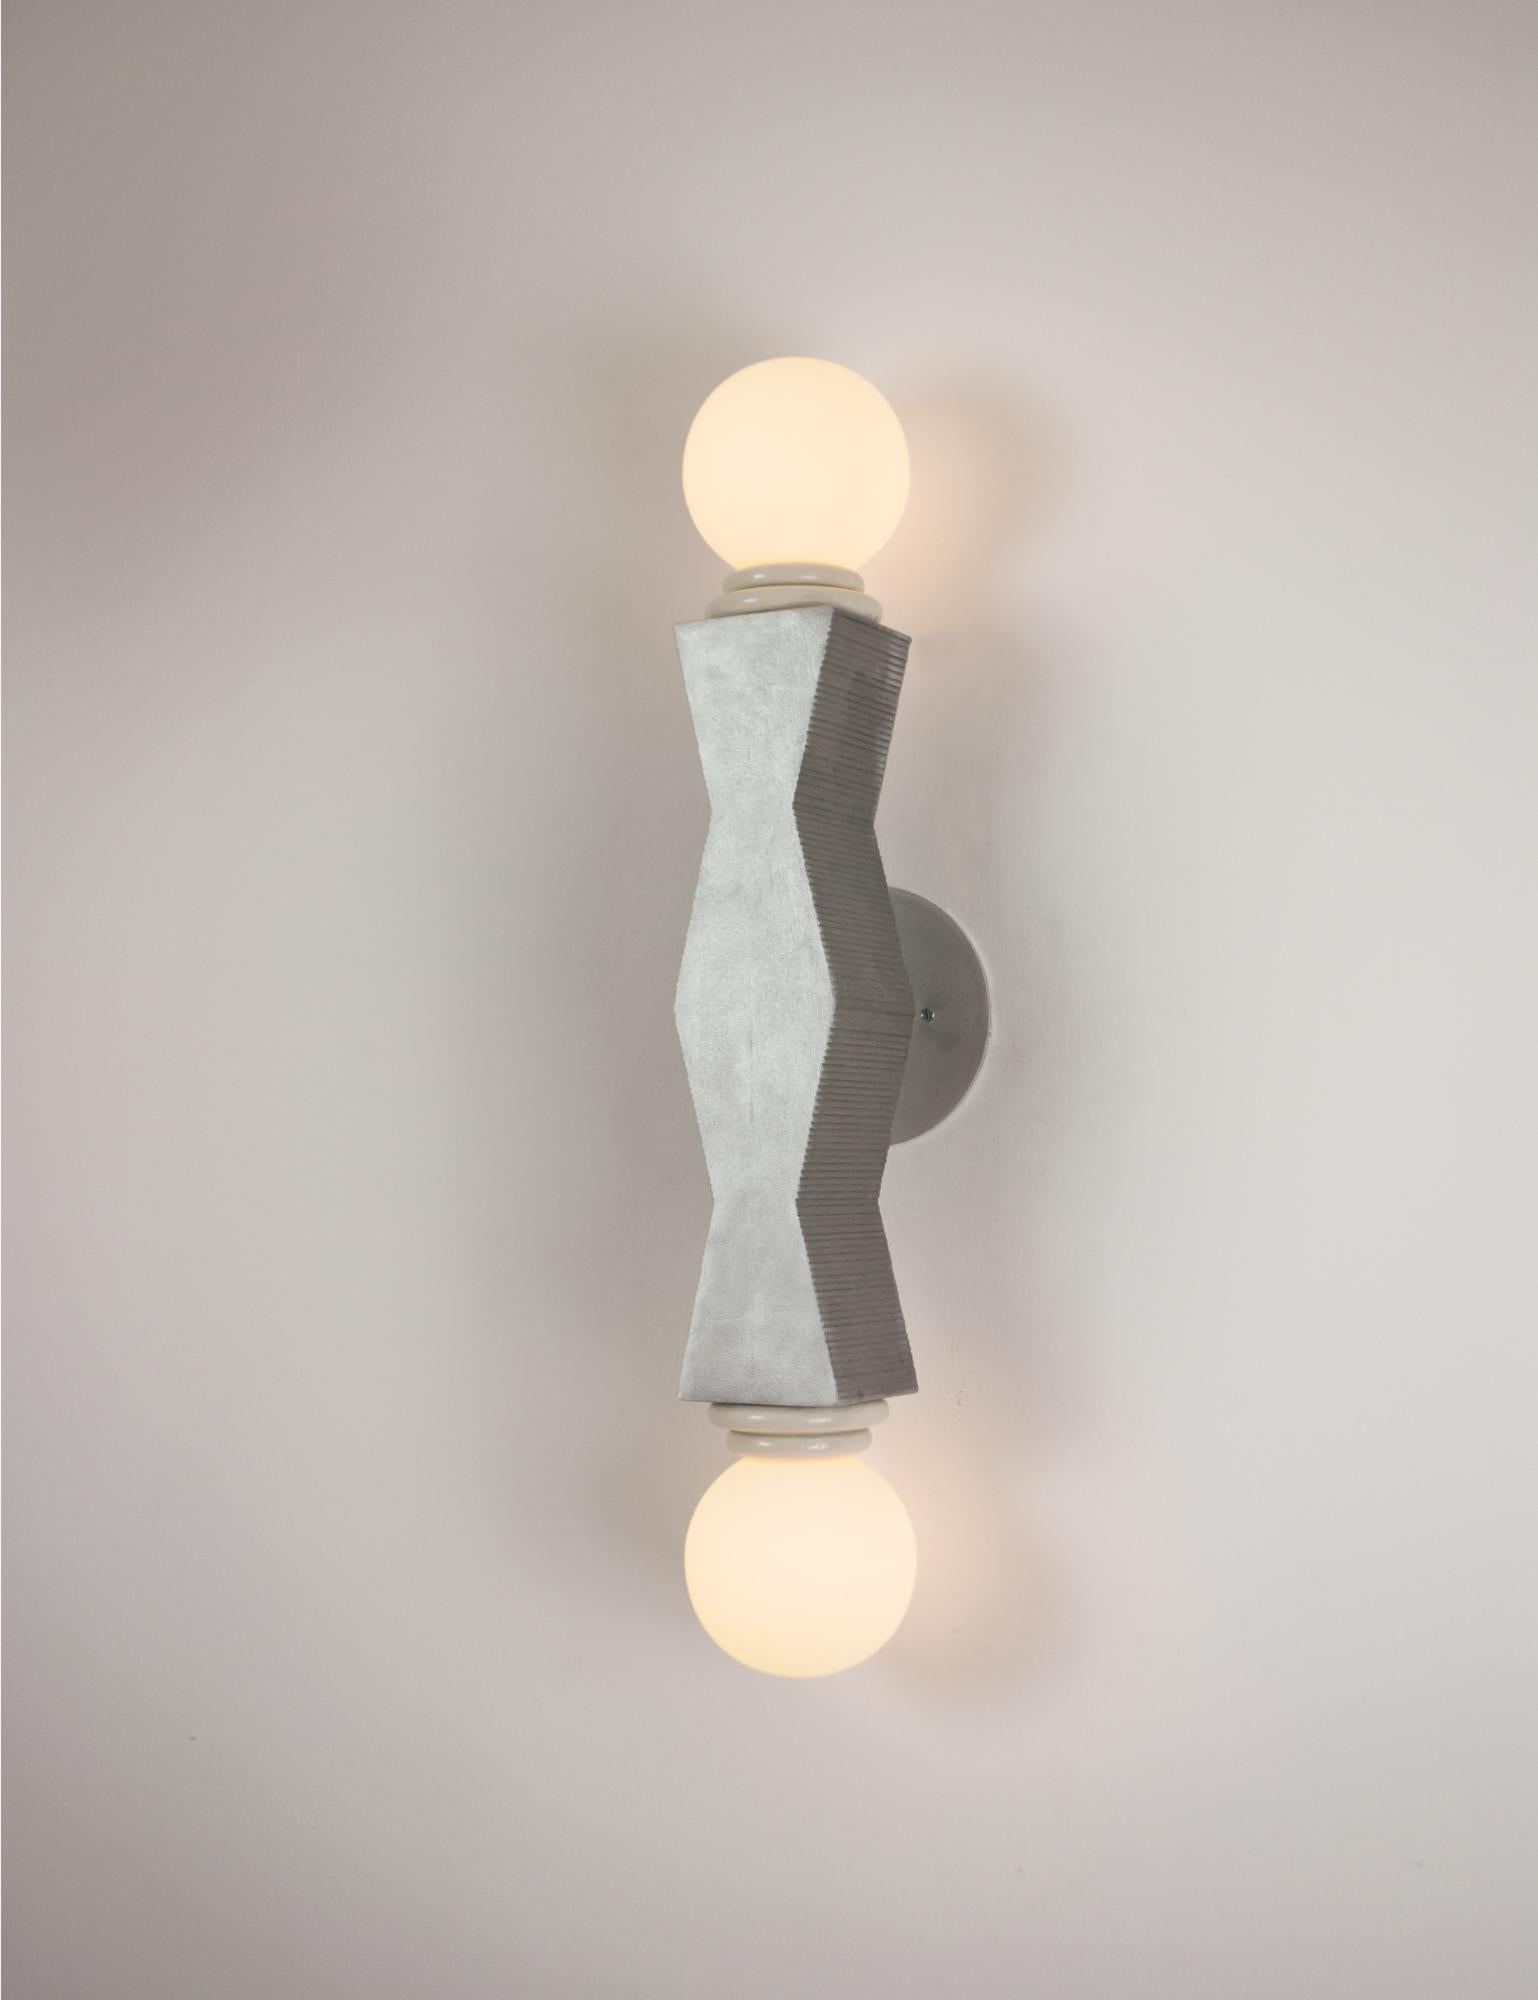 Contemporary Ridge wall light is hand-cast in aluminium with a raw brushed finish. The geometric cast form echo's early 20th century sculptors such as Brancusi and Noguchi. The ridged texture that gives the light its name is the result of the making